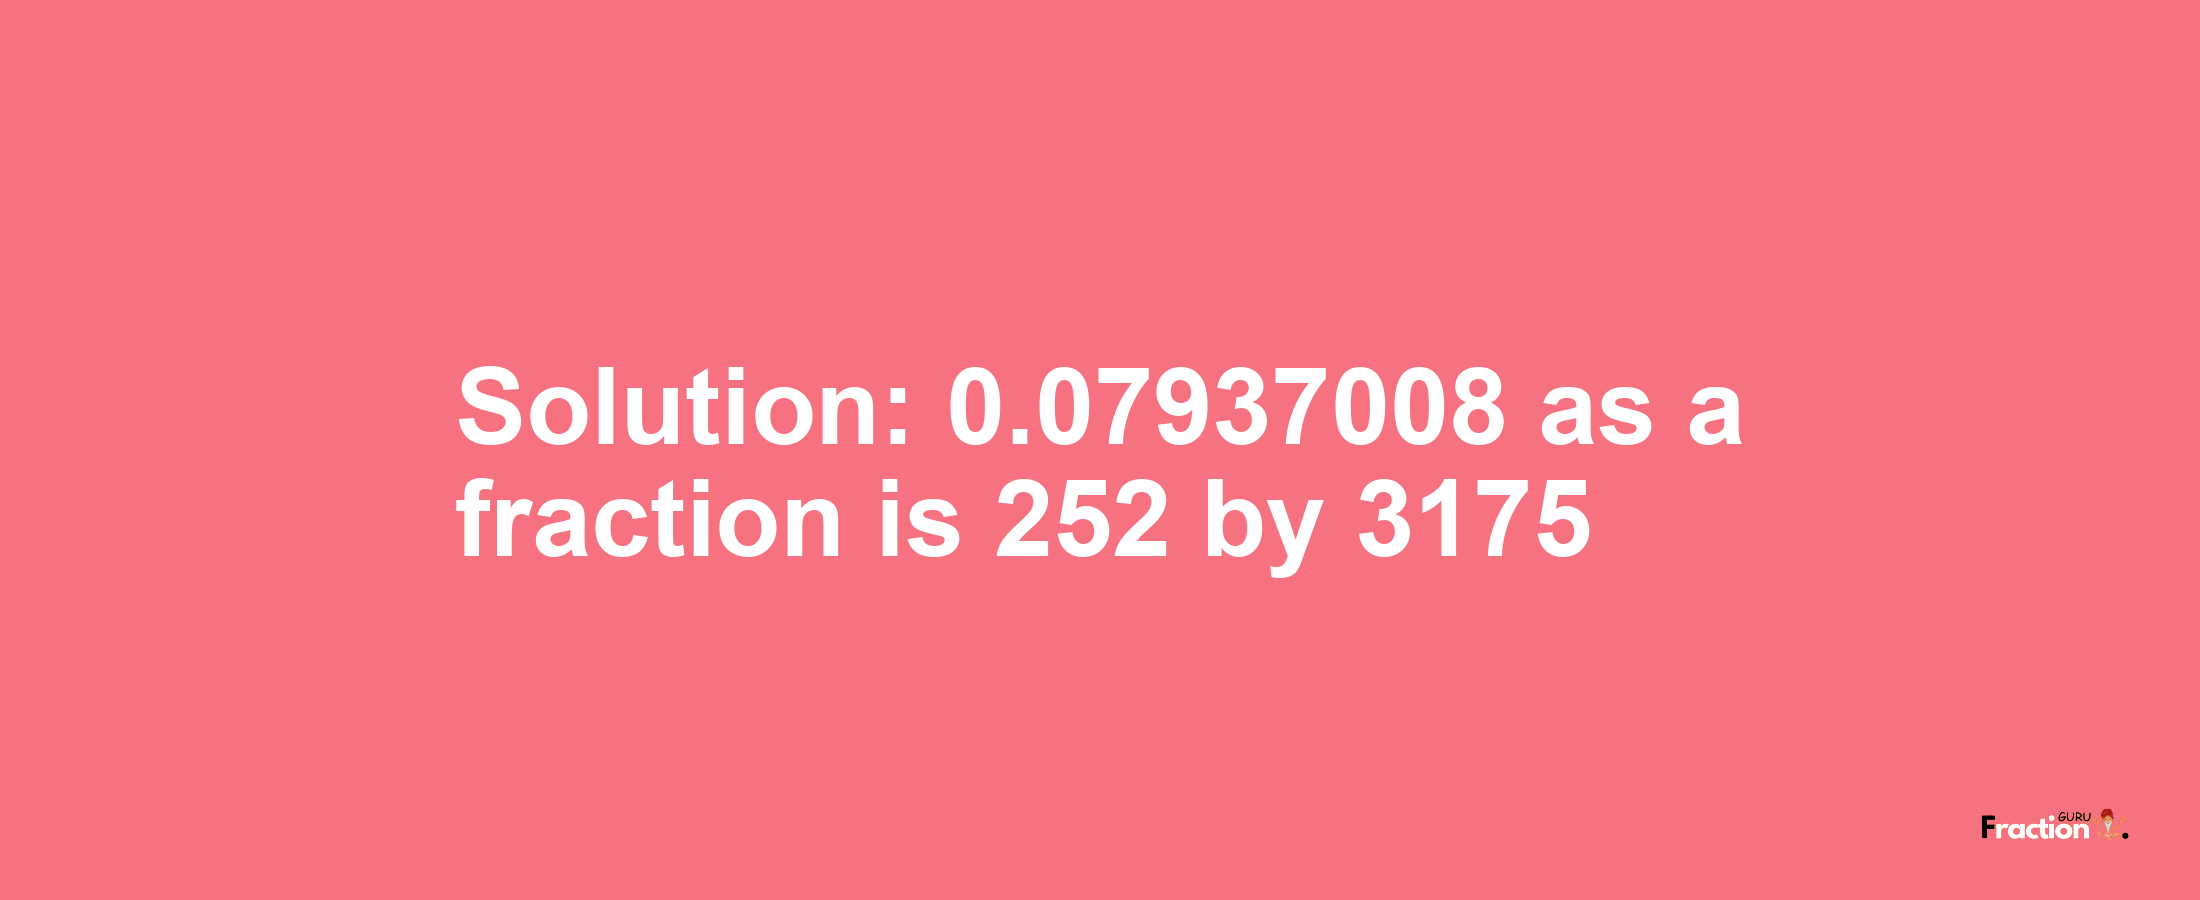 Solution:0.07937008 as a fraction is 252/3175